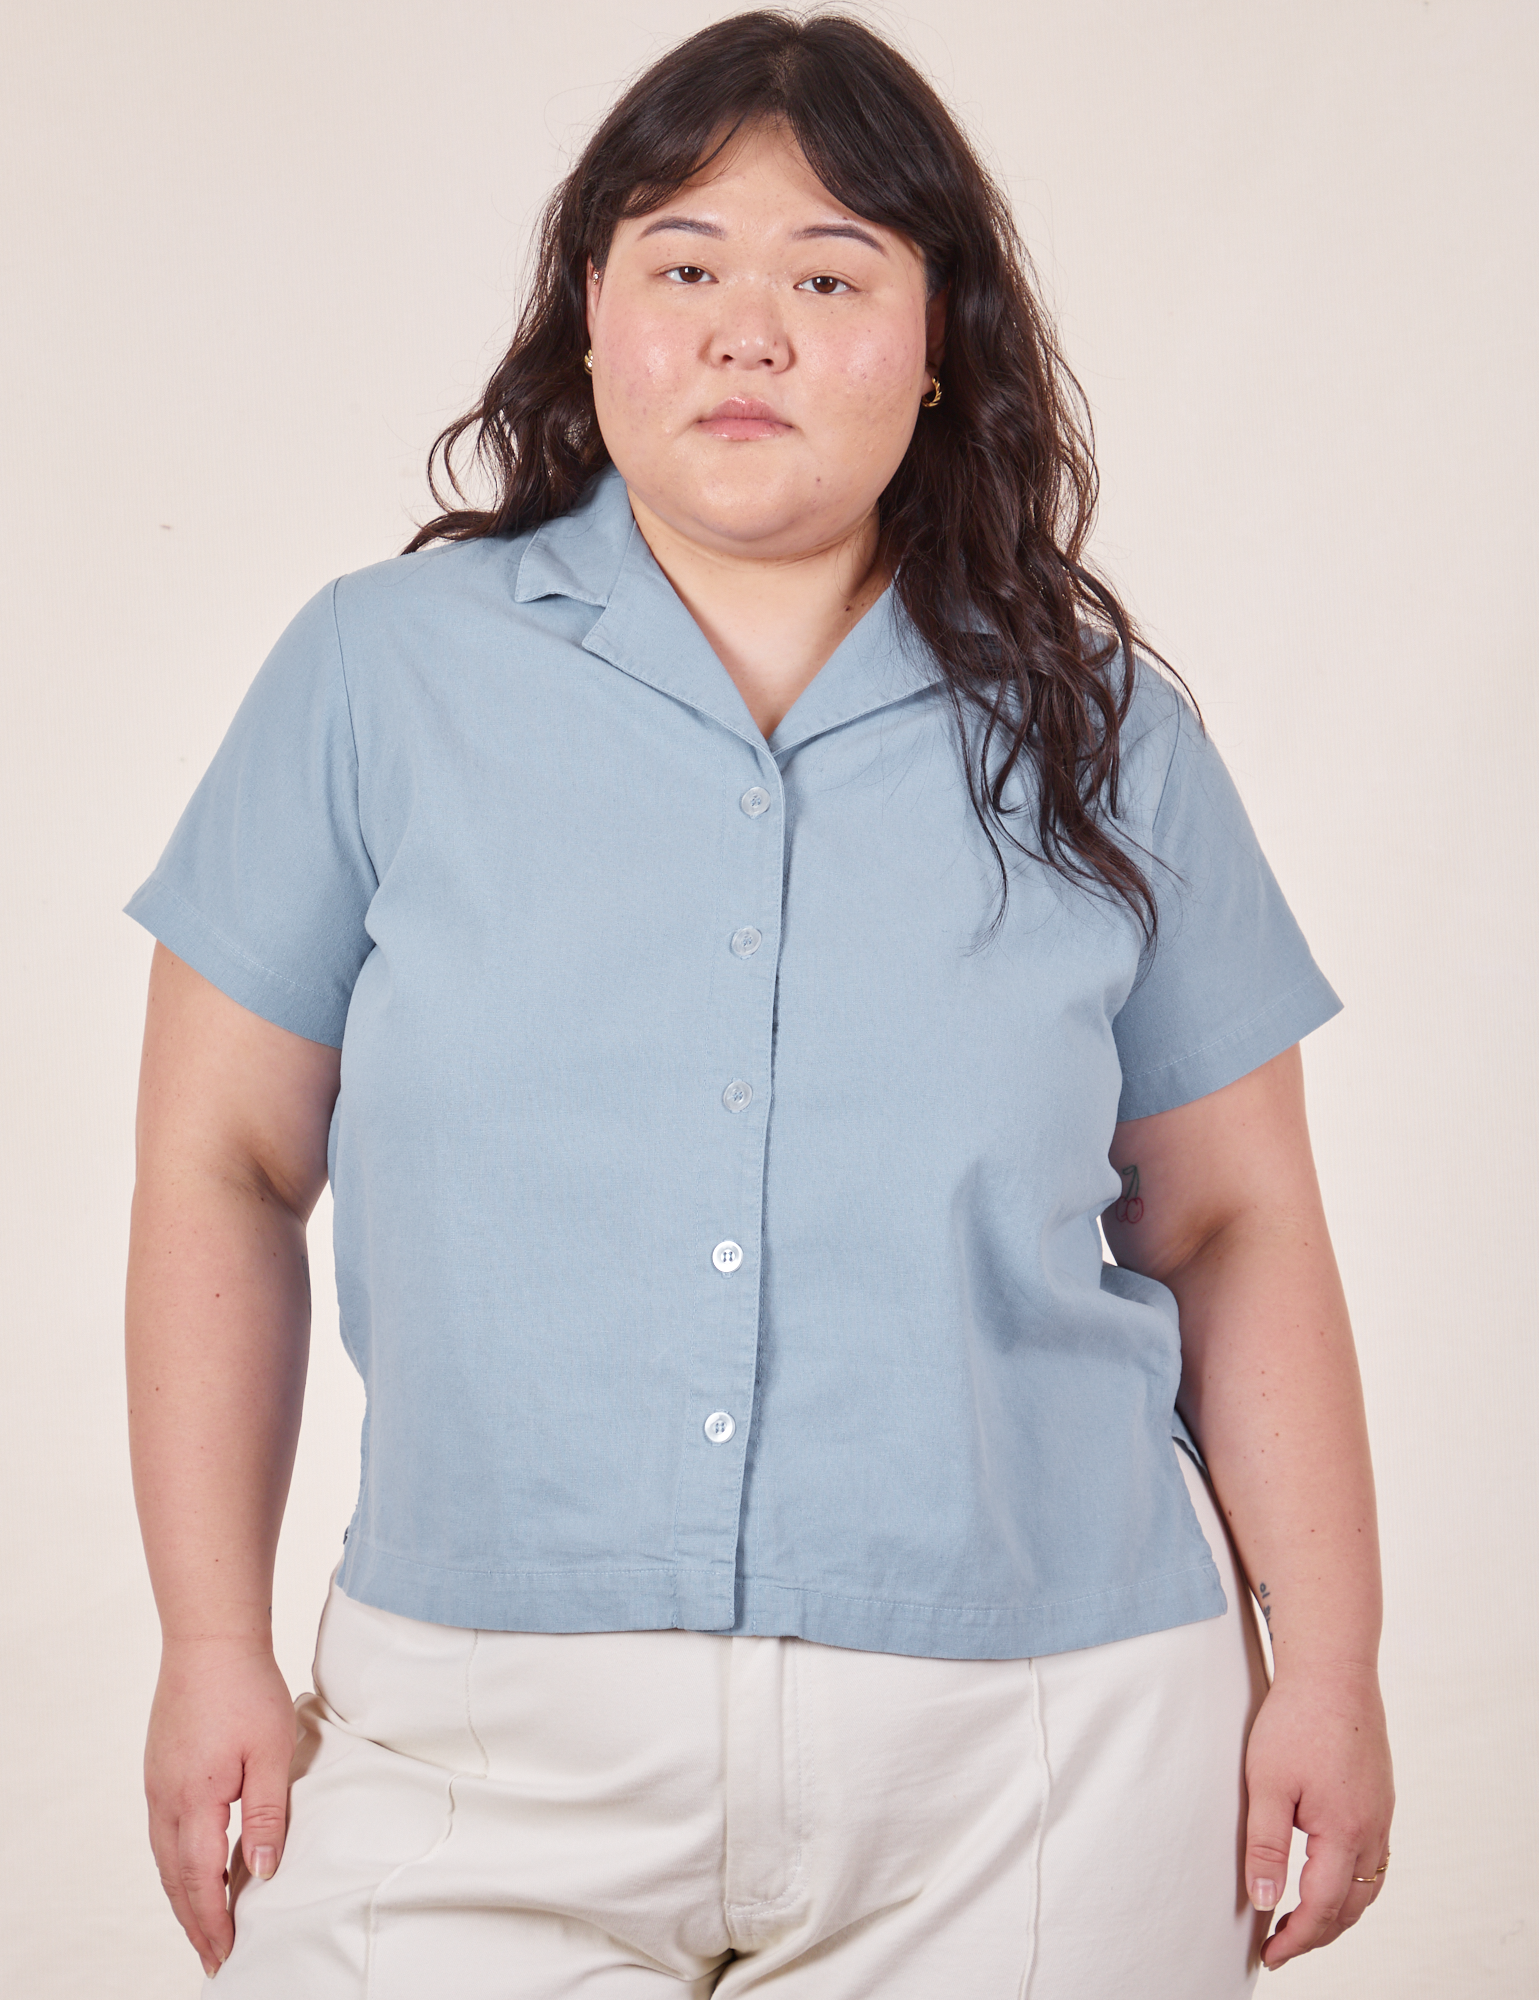 Ashley is 5&#39;7&quot; and wearing L Pantry Button-Up in Periwinkle